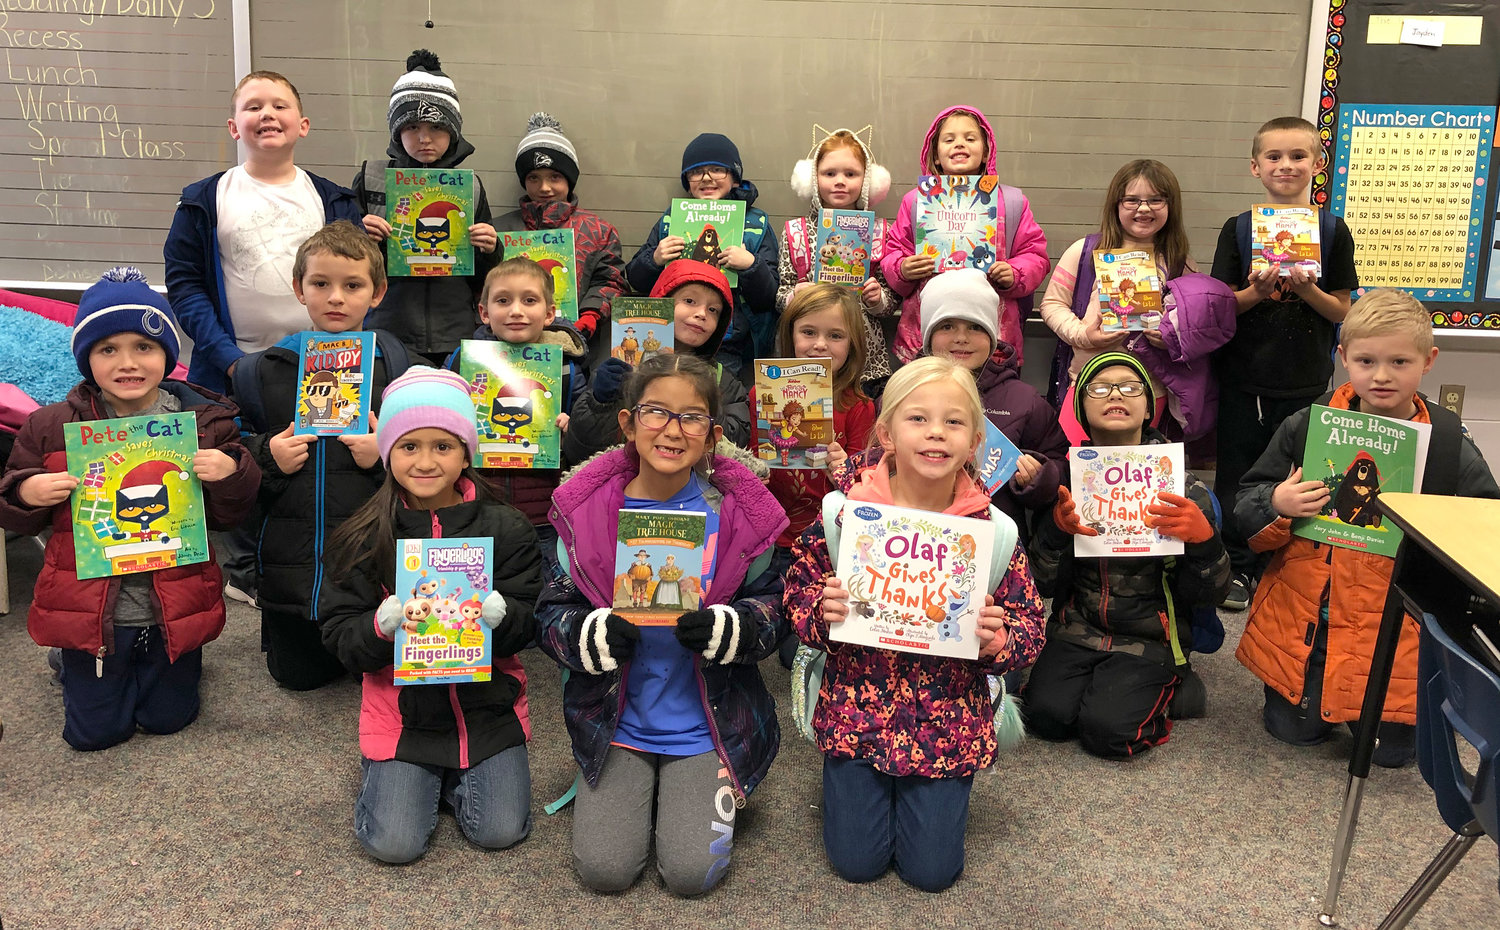 Sherri Paxton’s first grade class at Rockville Elementary won the Red Ribbon Week poster contest. Each student got to order a book from Scholastic as their prize. Class members are front row, Sofia Perez, Emme Carpenter and Kennedy Mager; middle row, Grady Hartman, Bentlee Lancaster, Eden Livermore, Isaac Richards, Kyndal Gordon, Makayla Rohr, Rodney Hutson and Jayden Blankman; and back row, Spencer Stone, Bronson Hein, Bodie Thornton, Jacob Martin, Emma Norman, Hensley Dawson, Oakley Pound and Jackson Wrightsman.